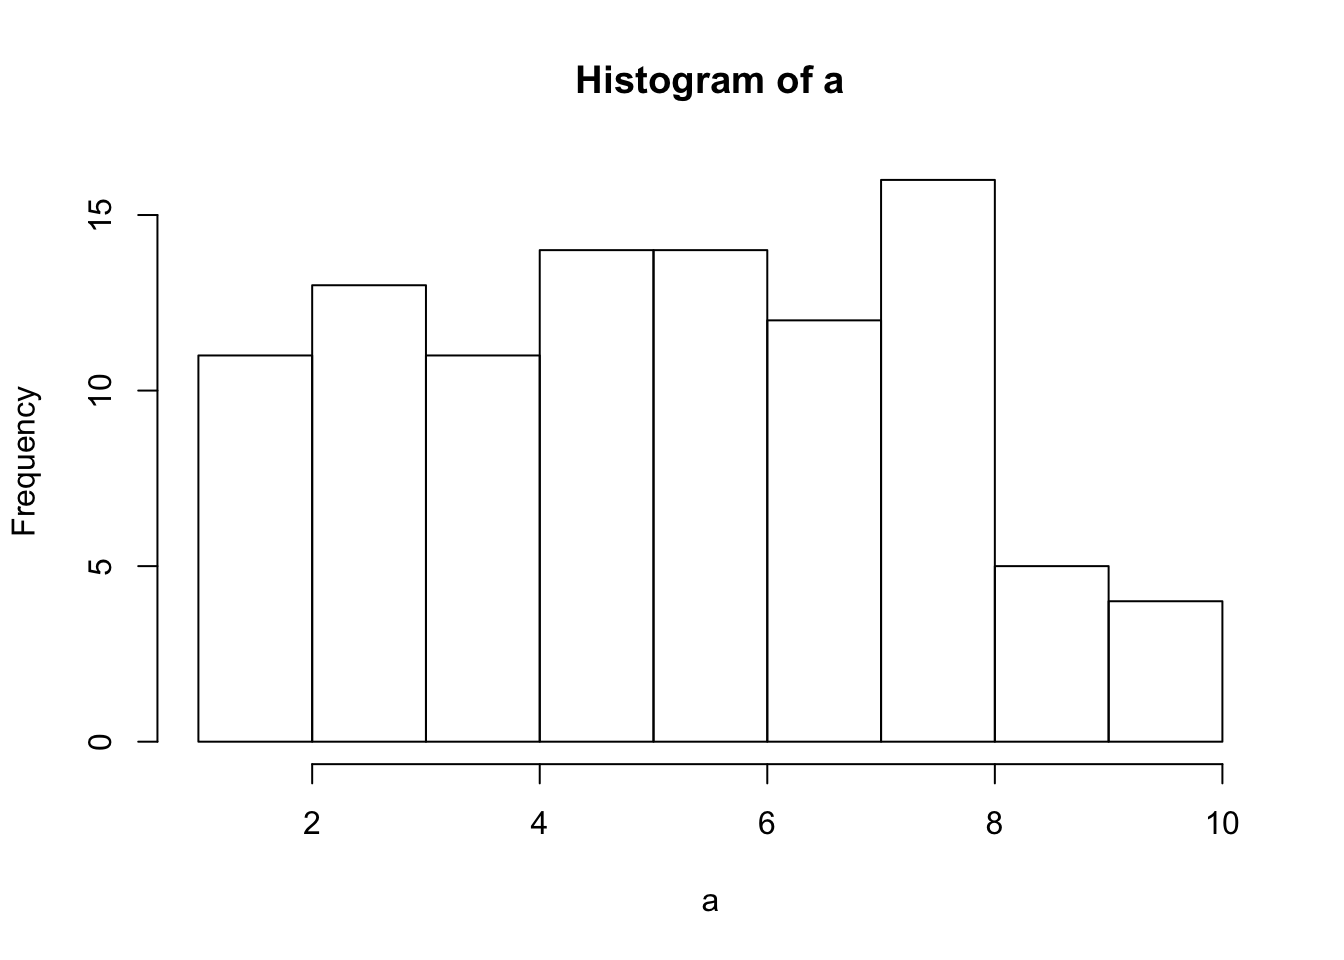 Histogram of a sampl of 100 numbers from the uniform distribution containing the integers from 1 to 10